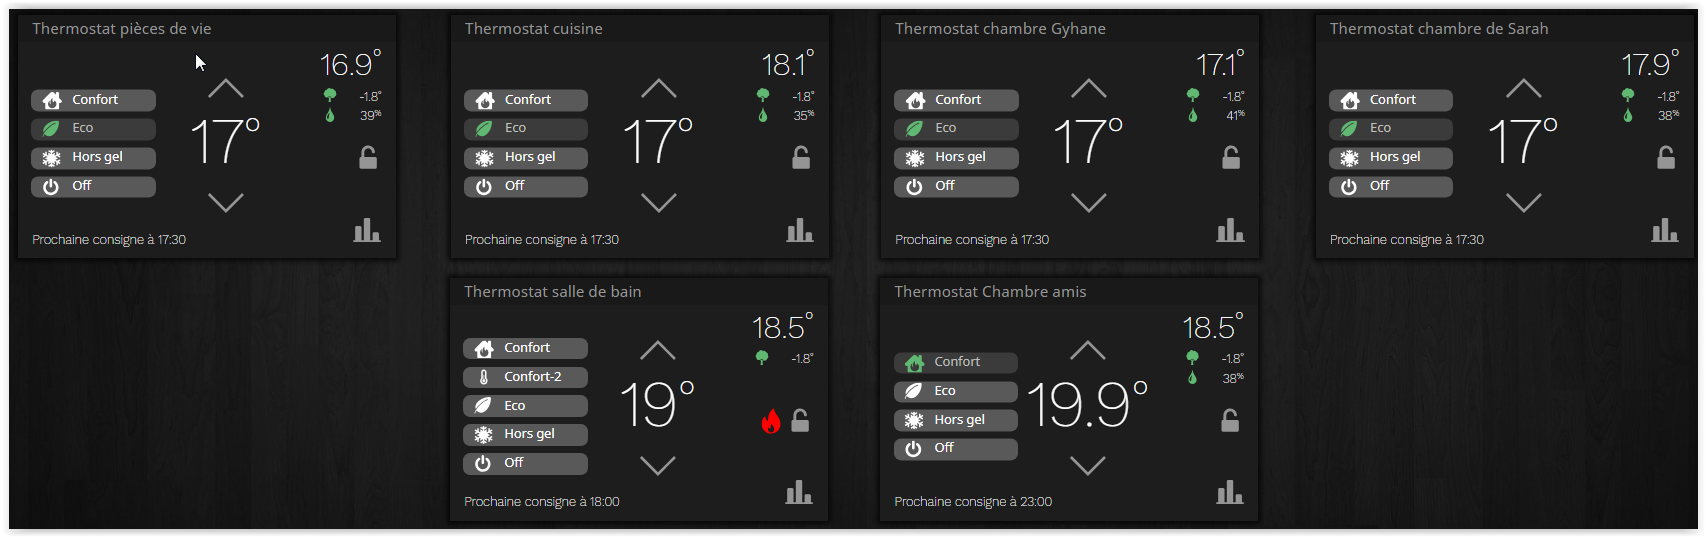 thermostat alternateview1.PNG